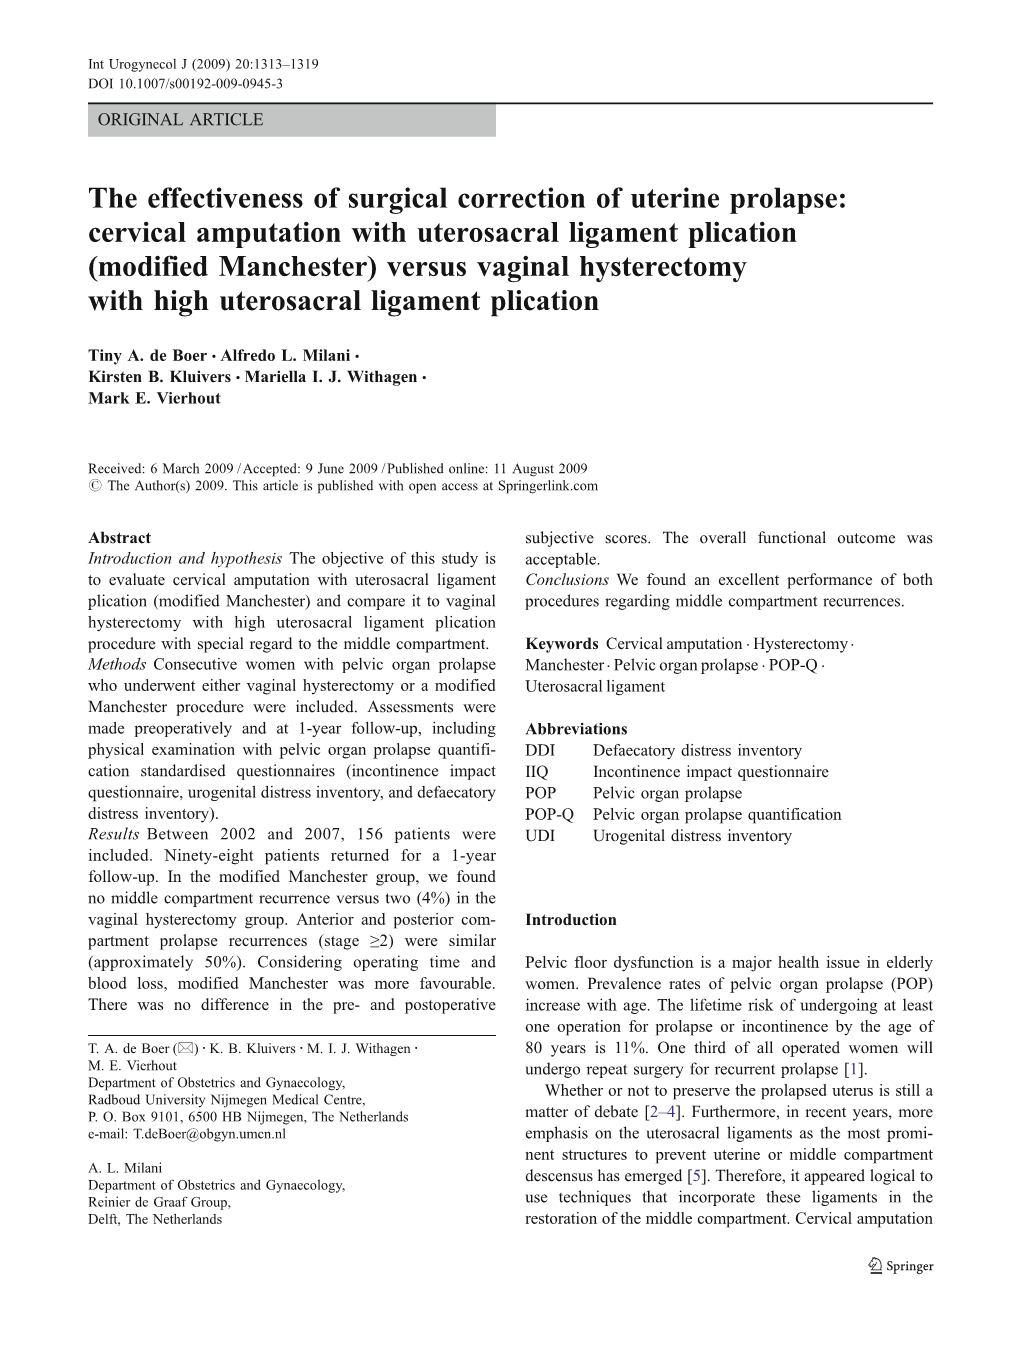 The Effectiveness of Surgical Correction of Uterine